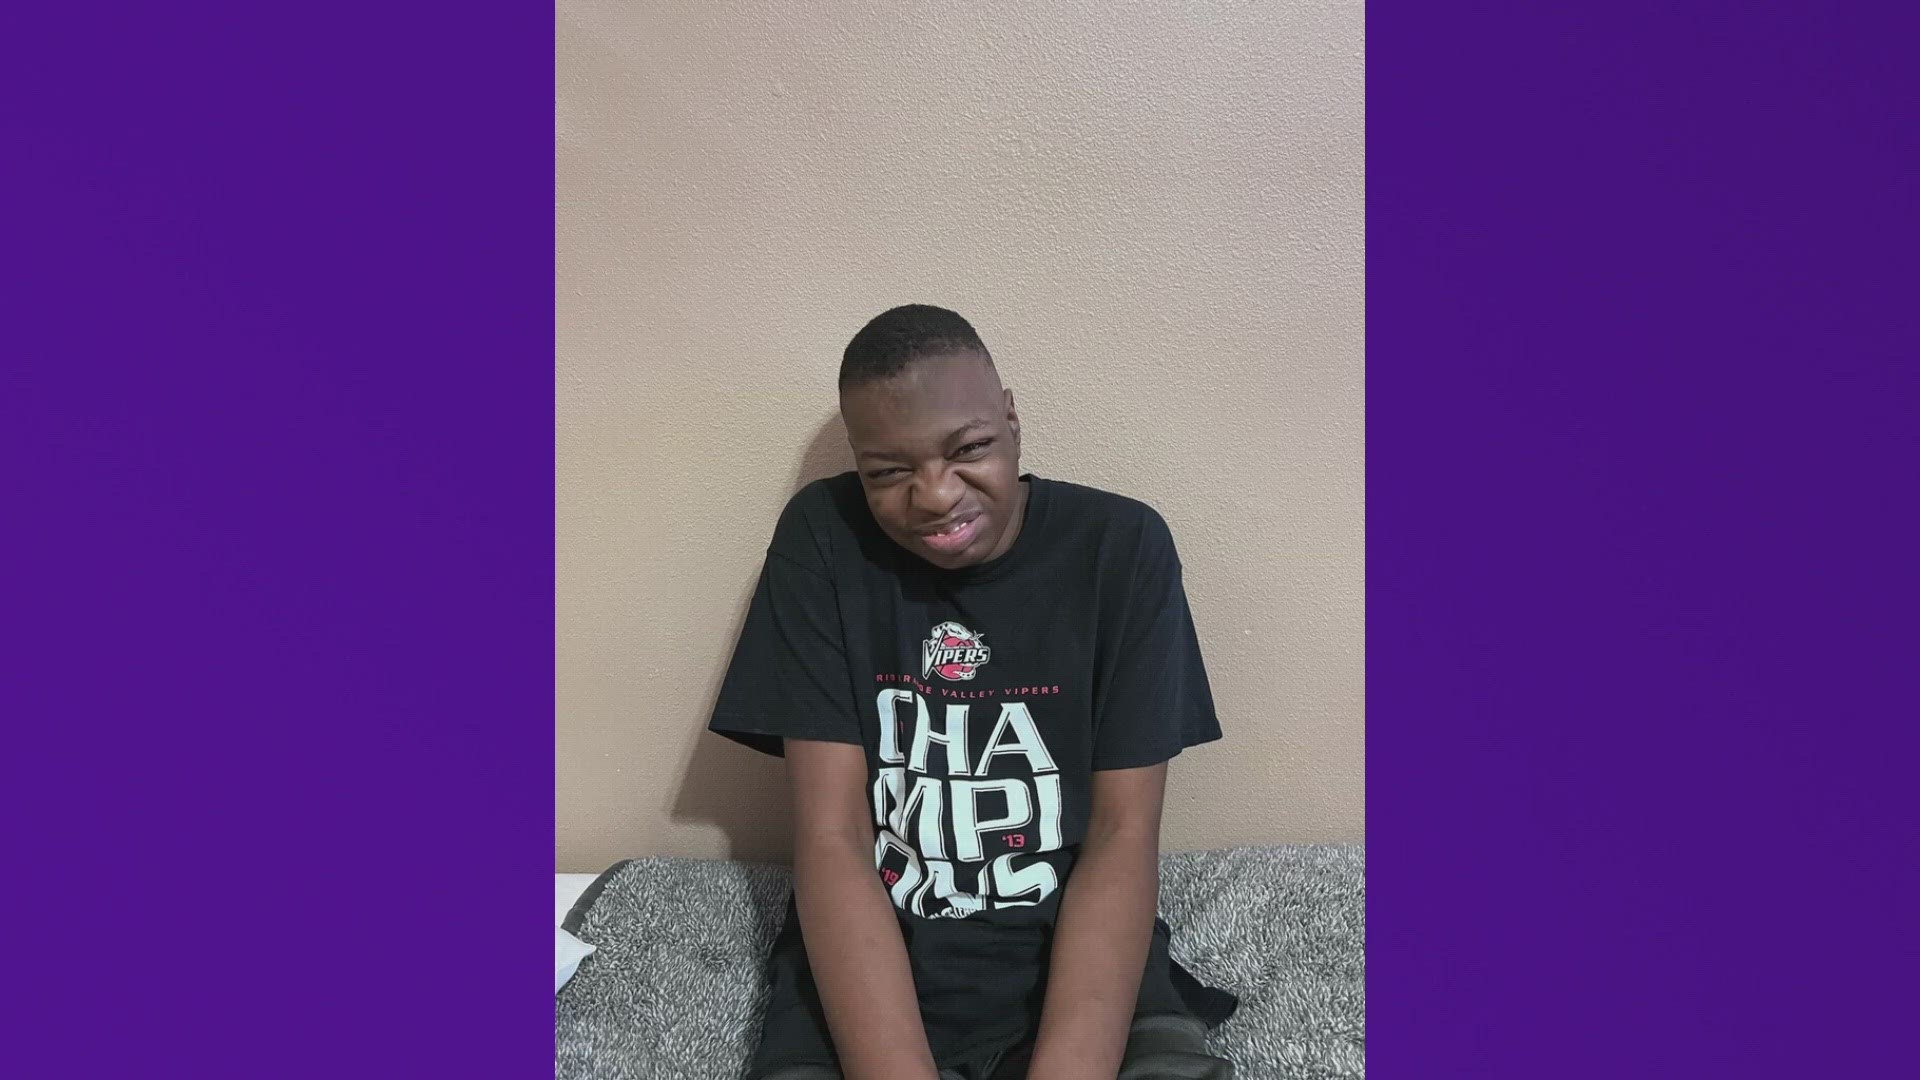 The teen, who they are now officially calling Cordarius, is doing well in foster care.